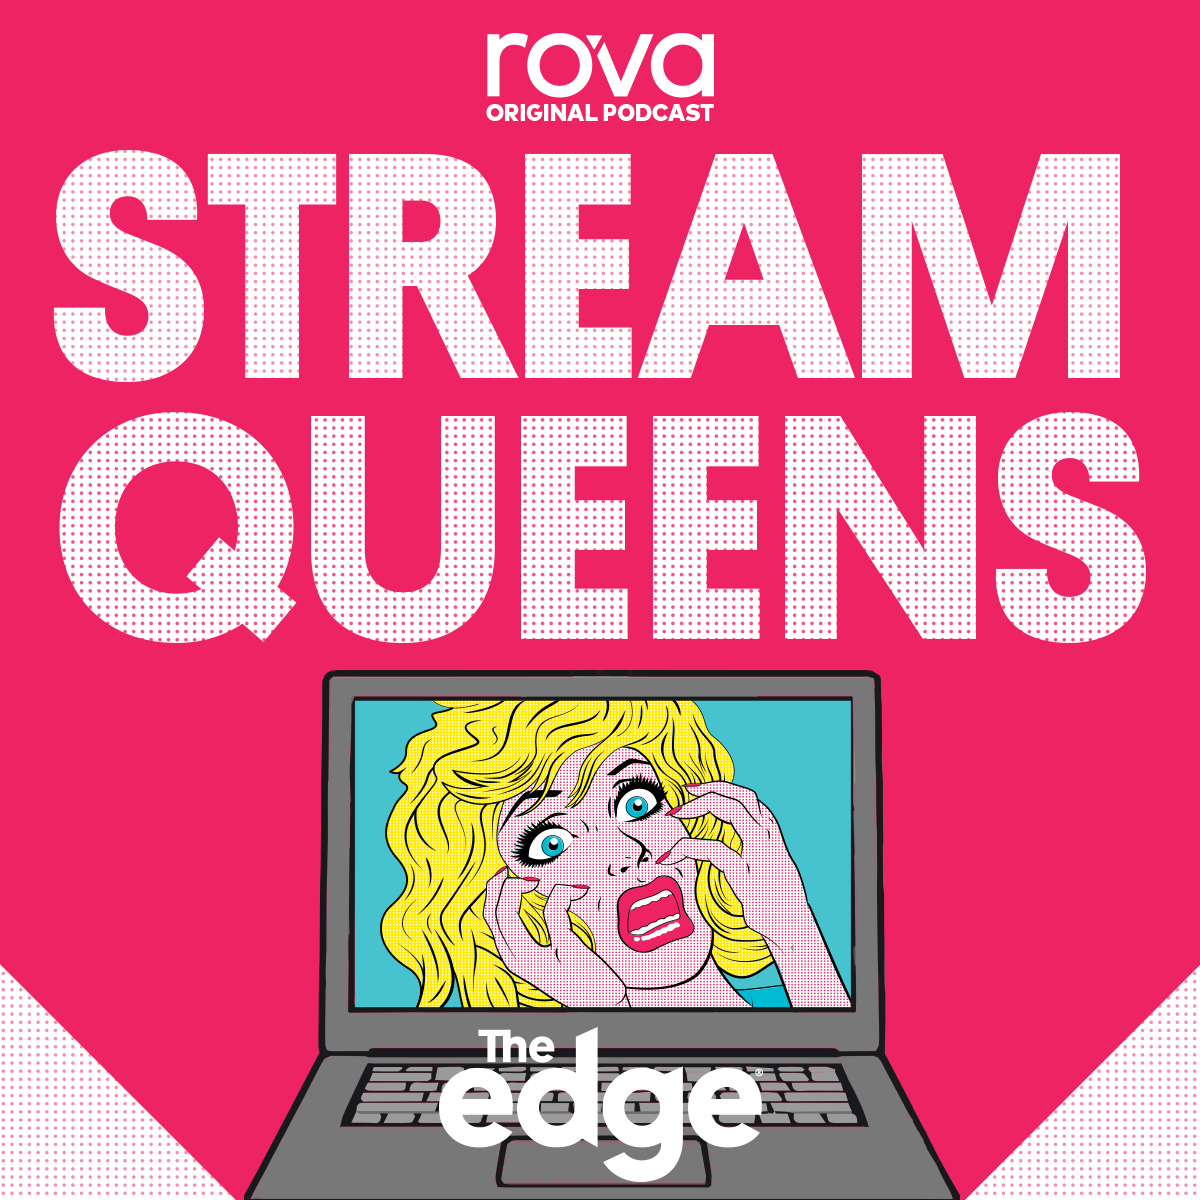 Stream Queens: That talent show we won't forget...